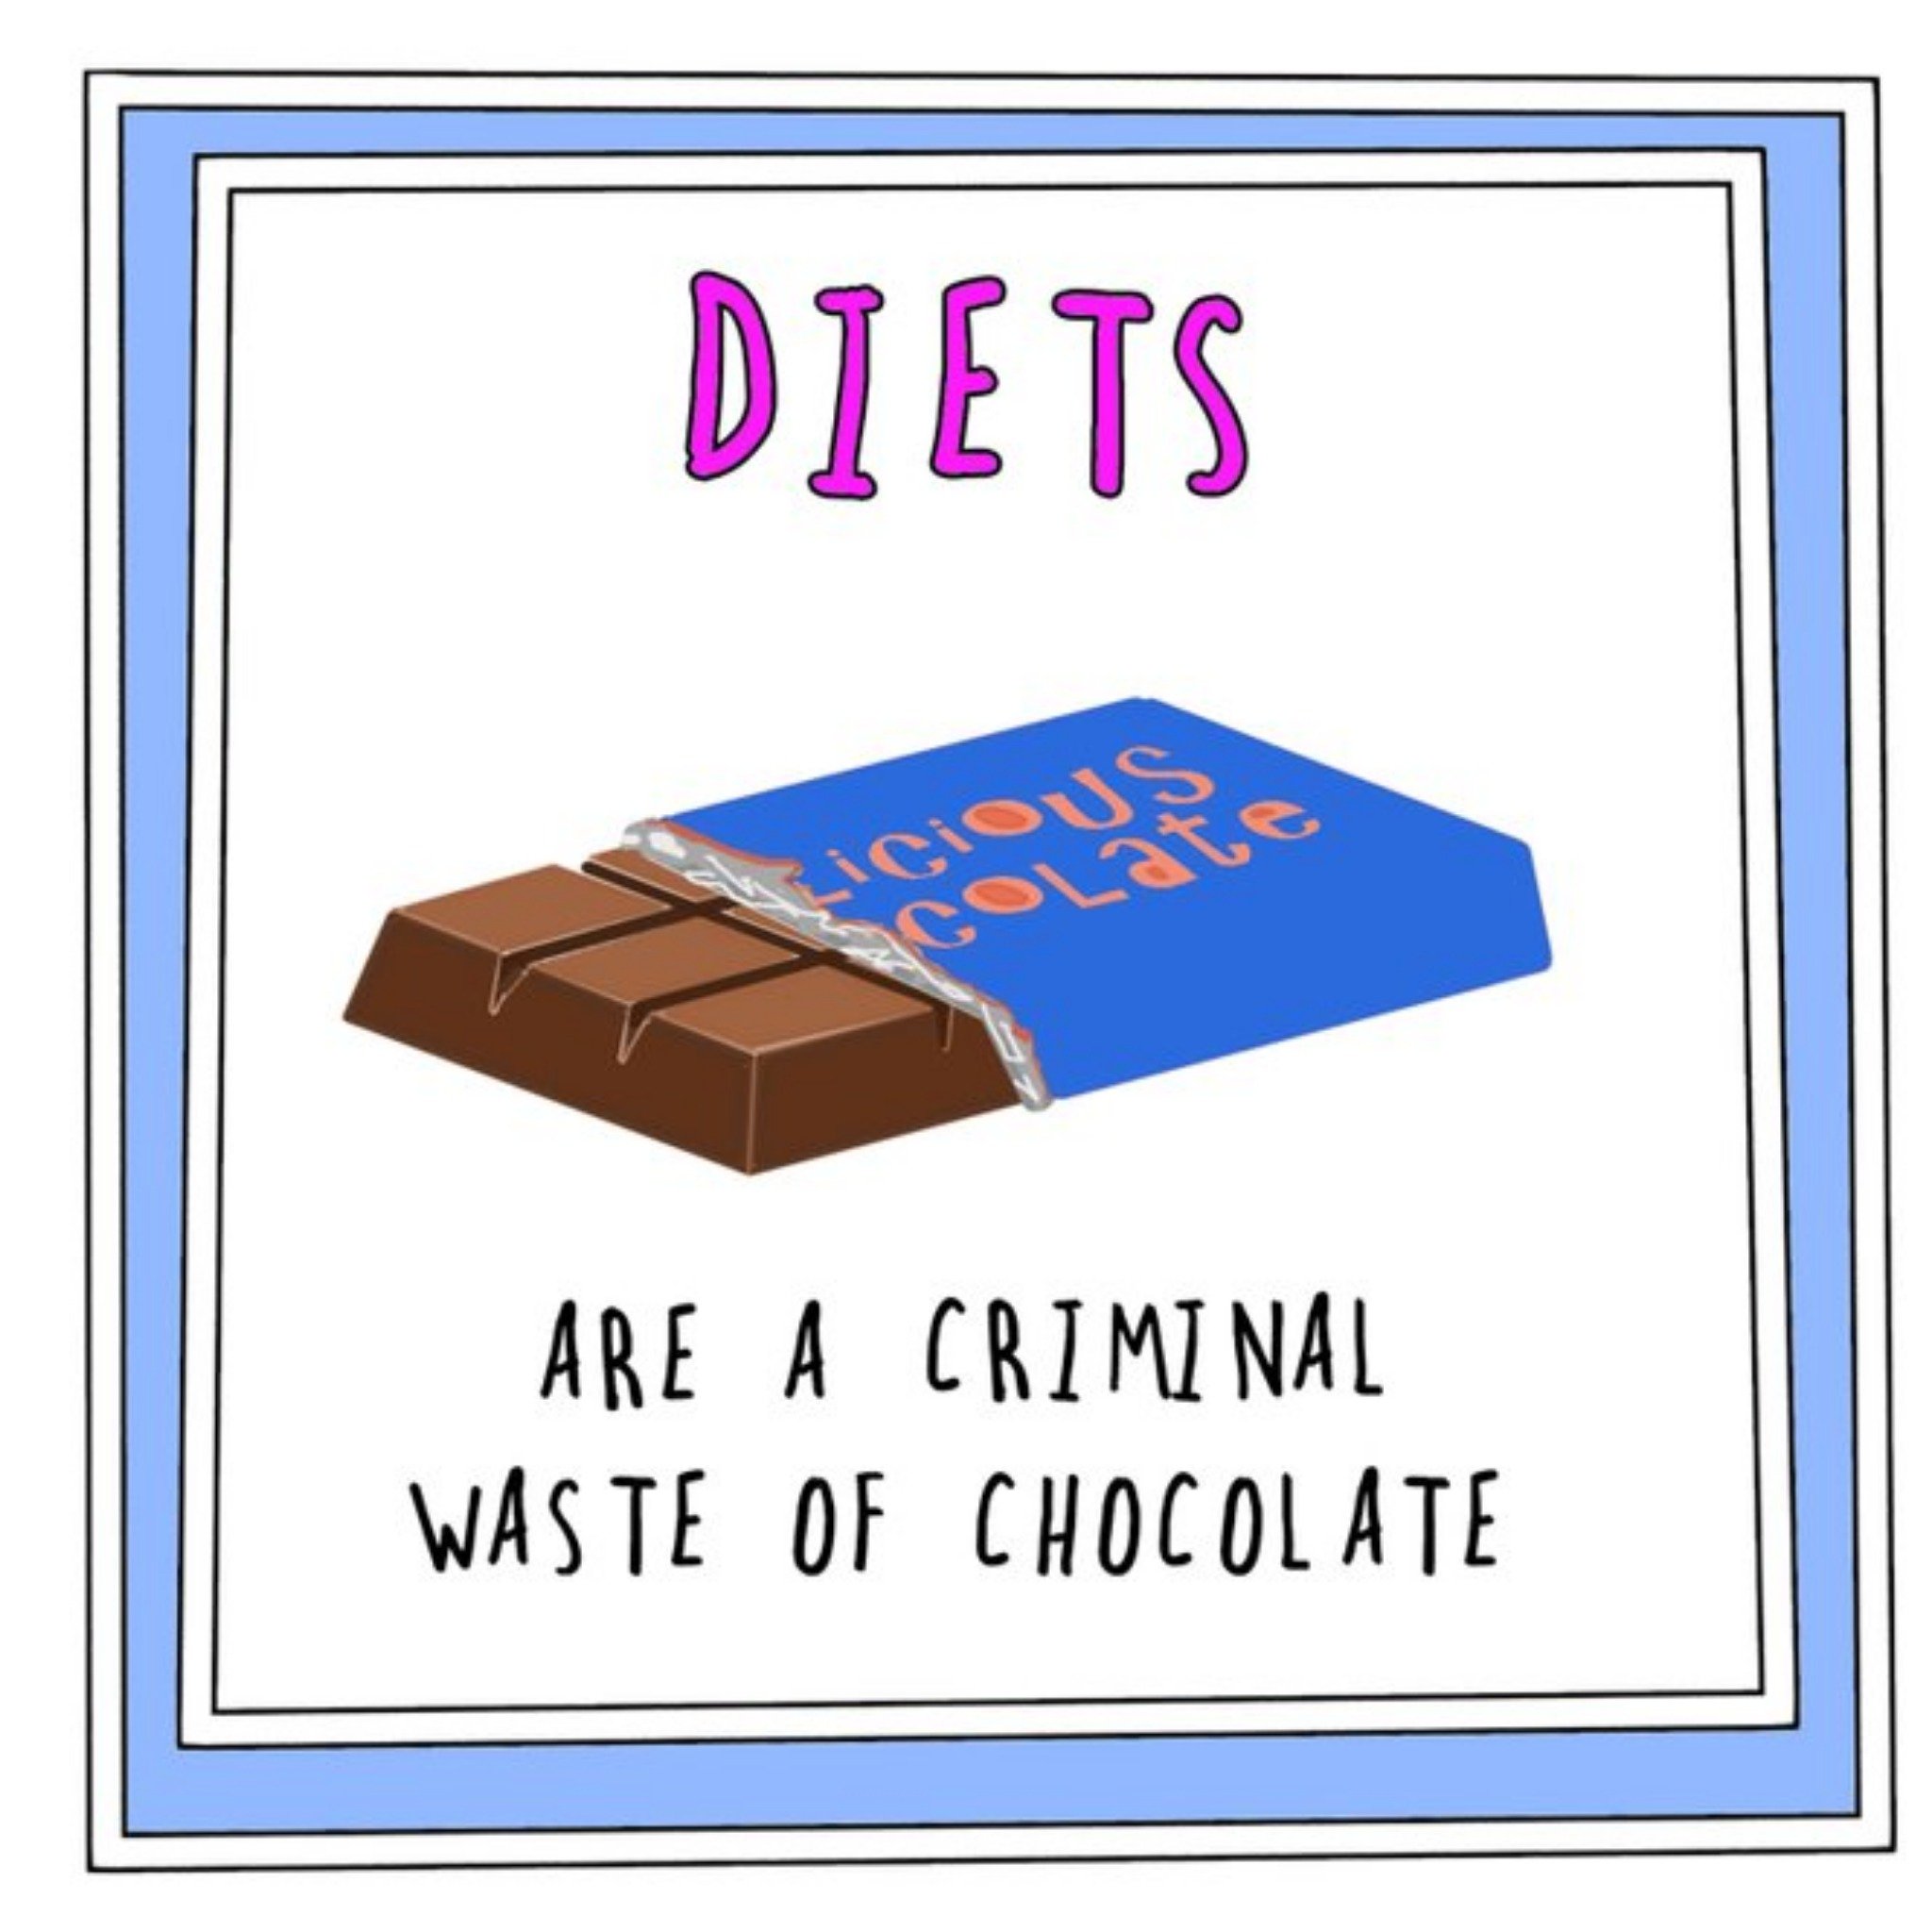 Go La La Funny Cheeky Diets Are A Criminal Waste Of Chocolate Card, Large